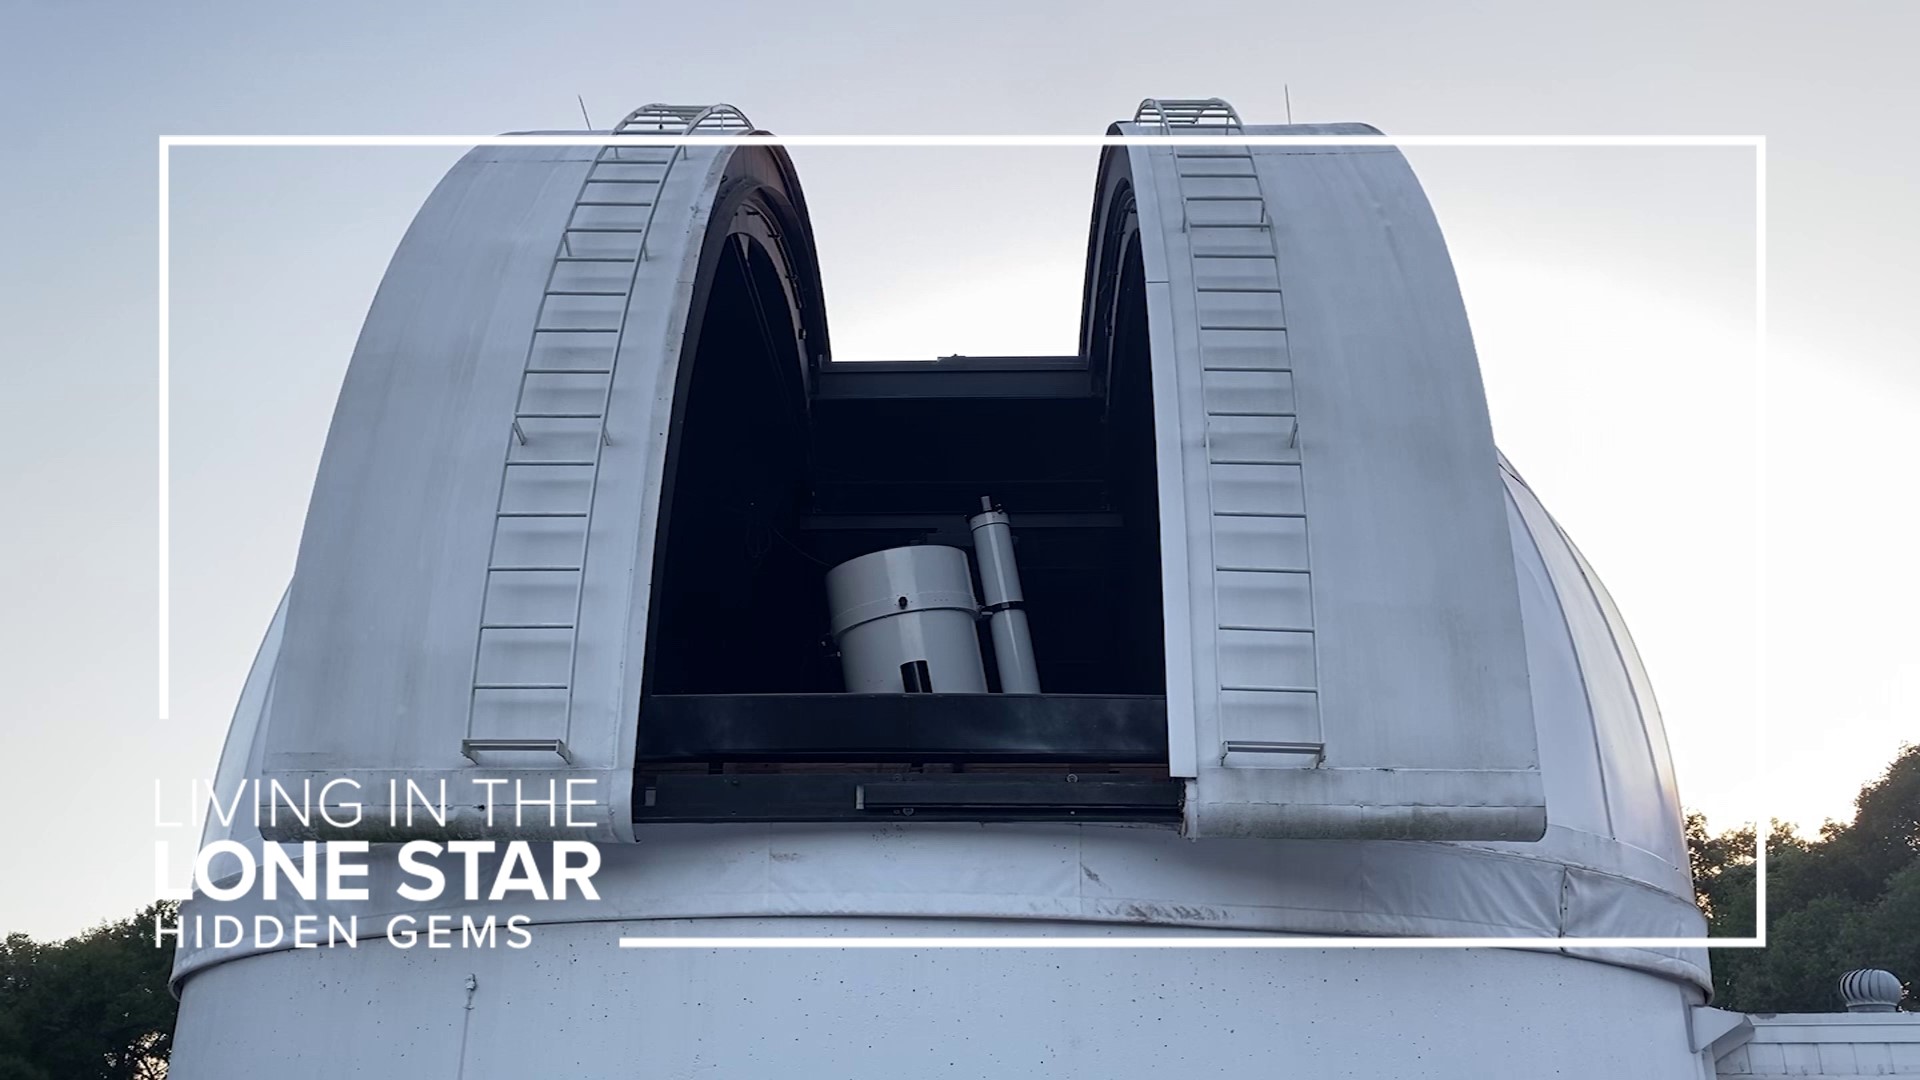 Along with its 36-inch research telescope, George Observatory has two more large telescopes and hosts amateur astronomers to help guests check out the night sky.